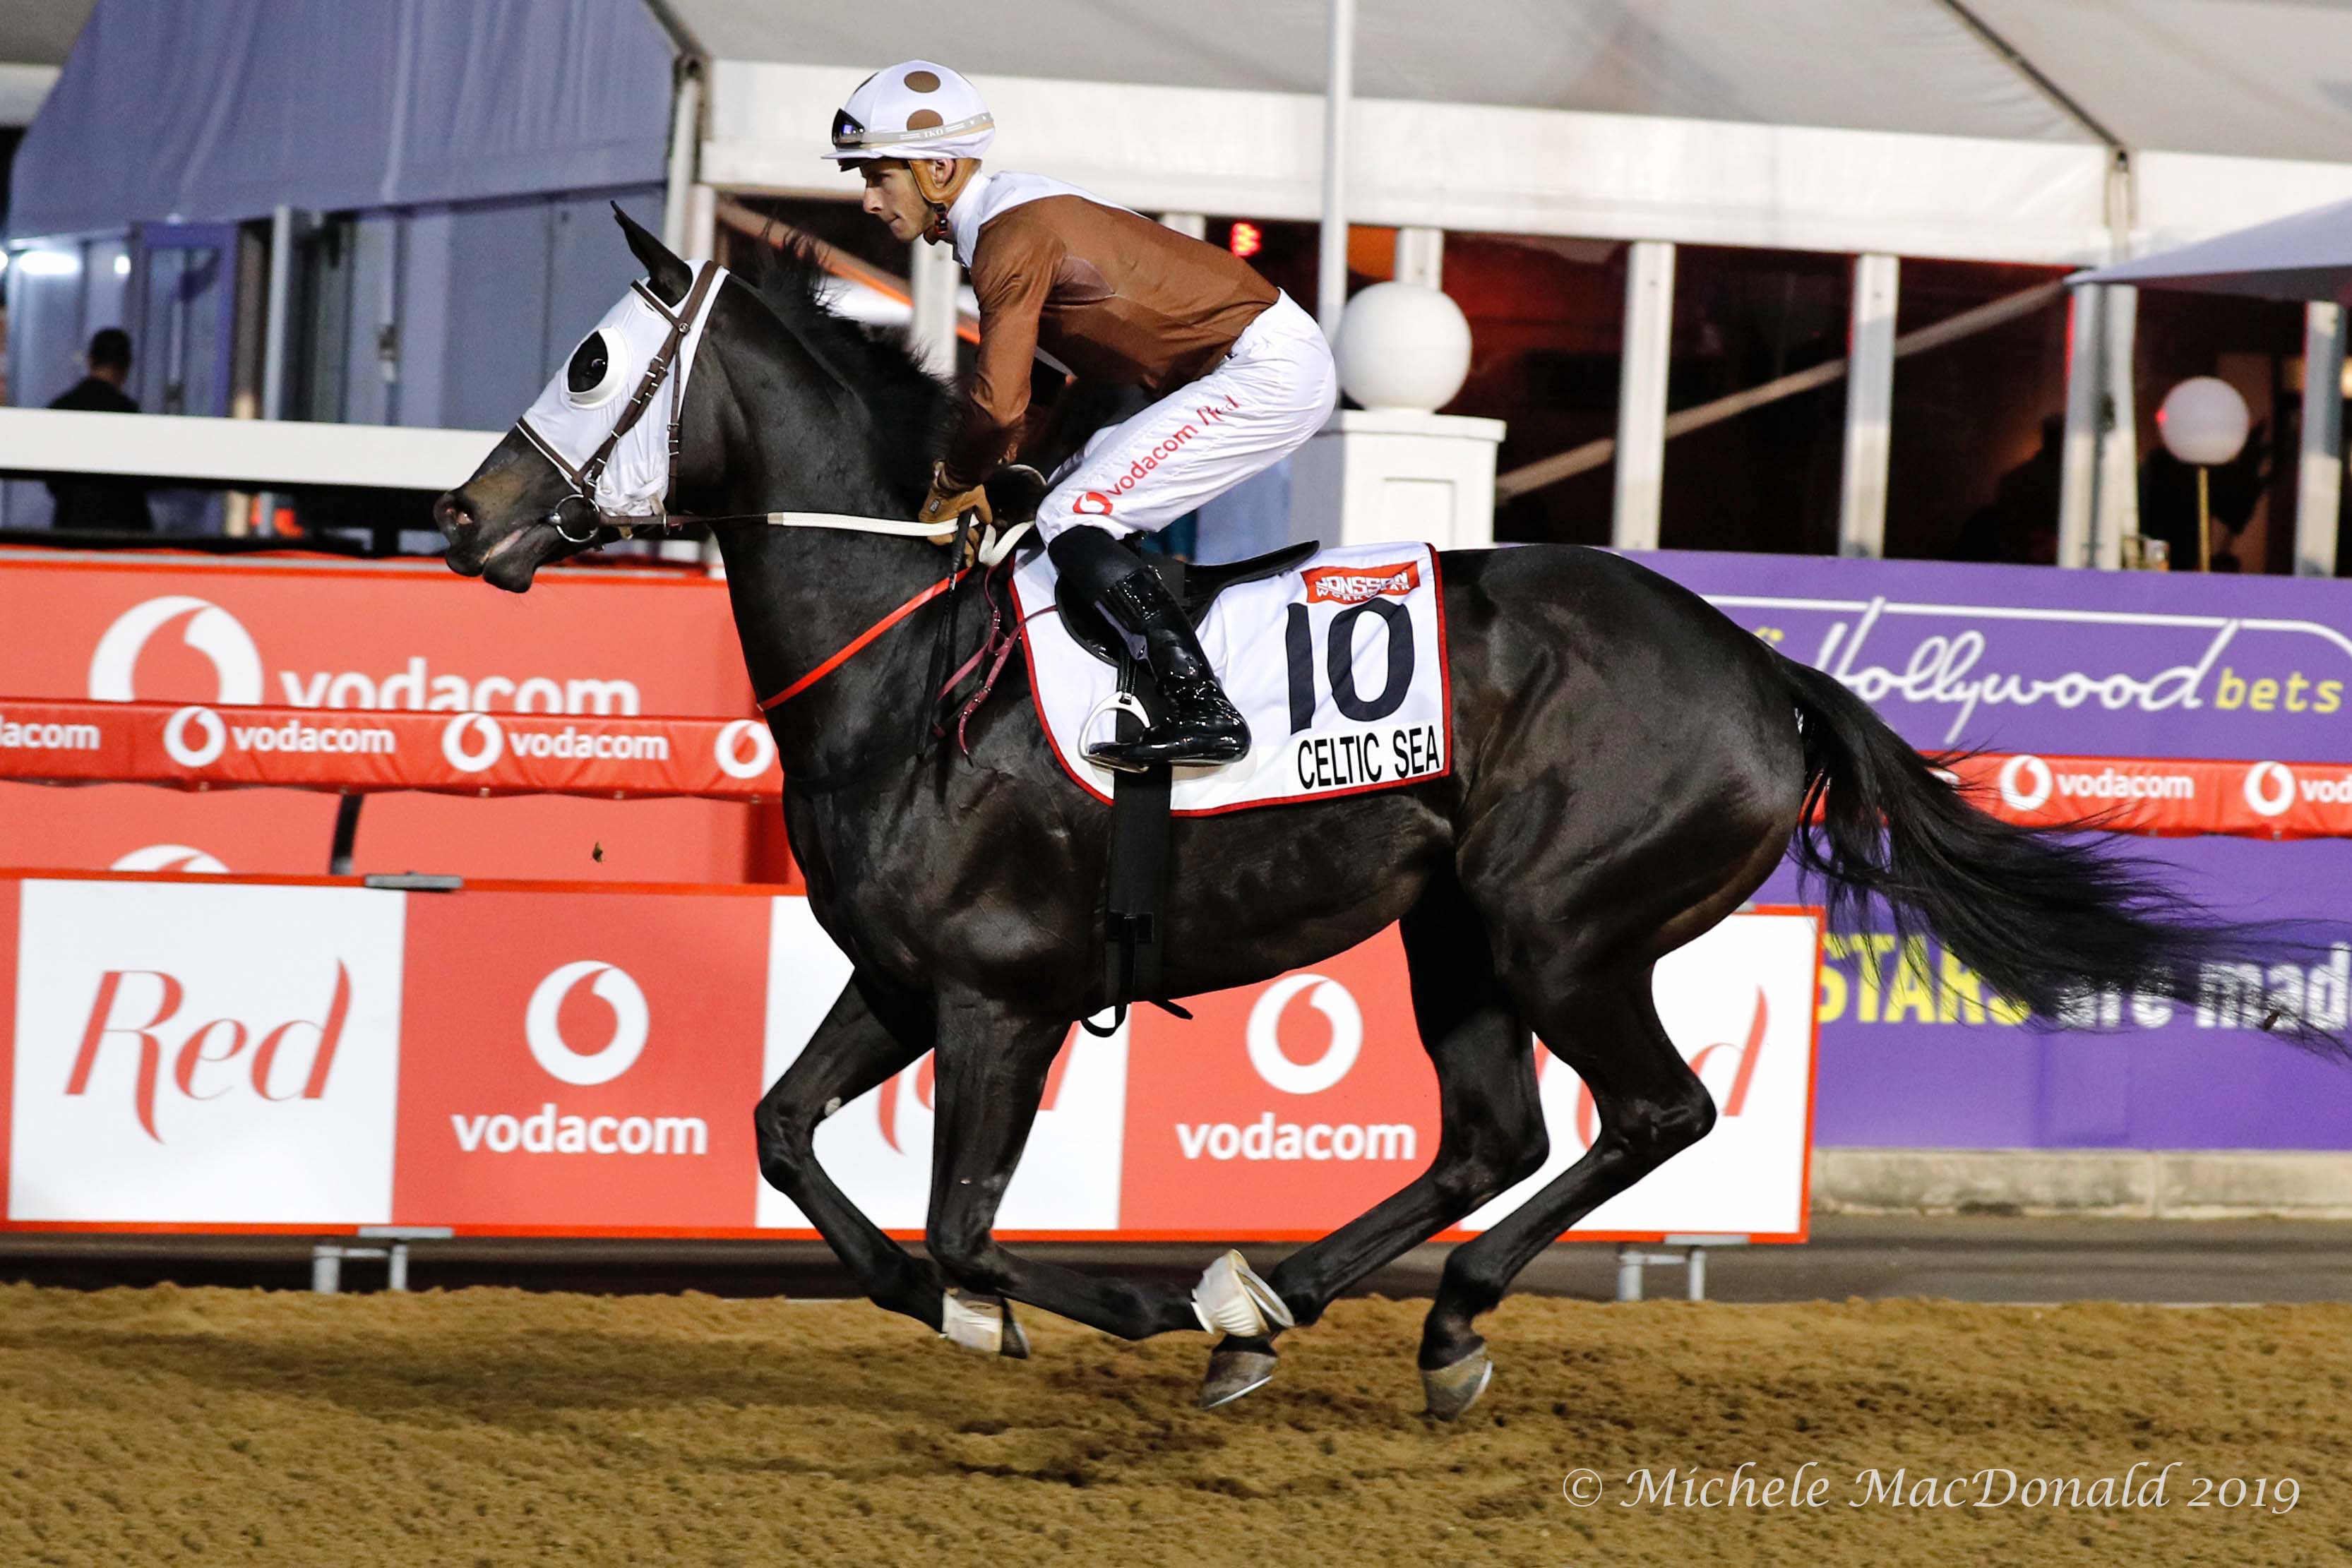 Grade 1 heroes: Lyle Hewitson on Celtic Sea in a warm-up gallop before winning the G1 Garden Province Stakes on this year’s Durban July card. The Captain Al filly is trained by South Africa’s multi-champion Sean Tarry and owned by Antony Beck, who also owns Gainesway Farm in Kentucky. Photo: Michele MacDonald